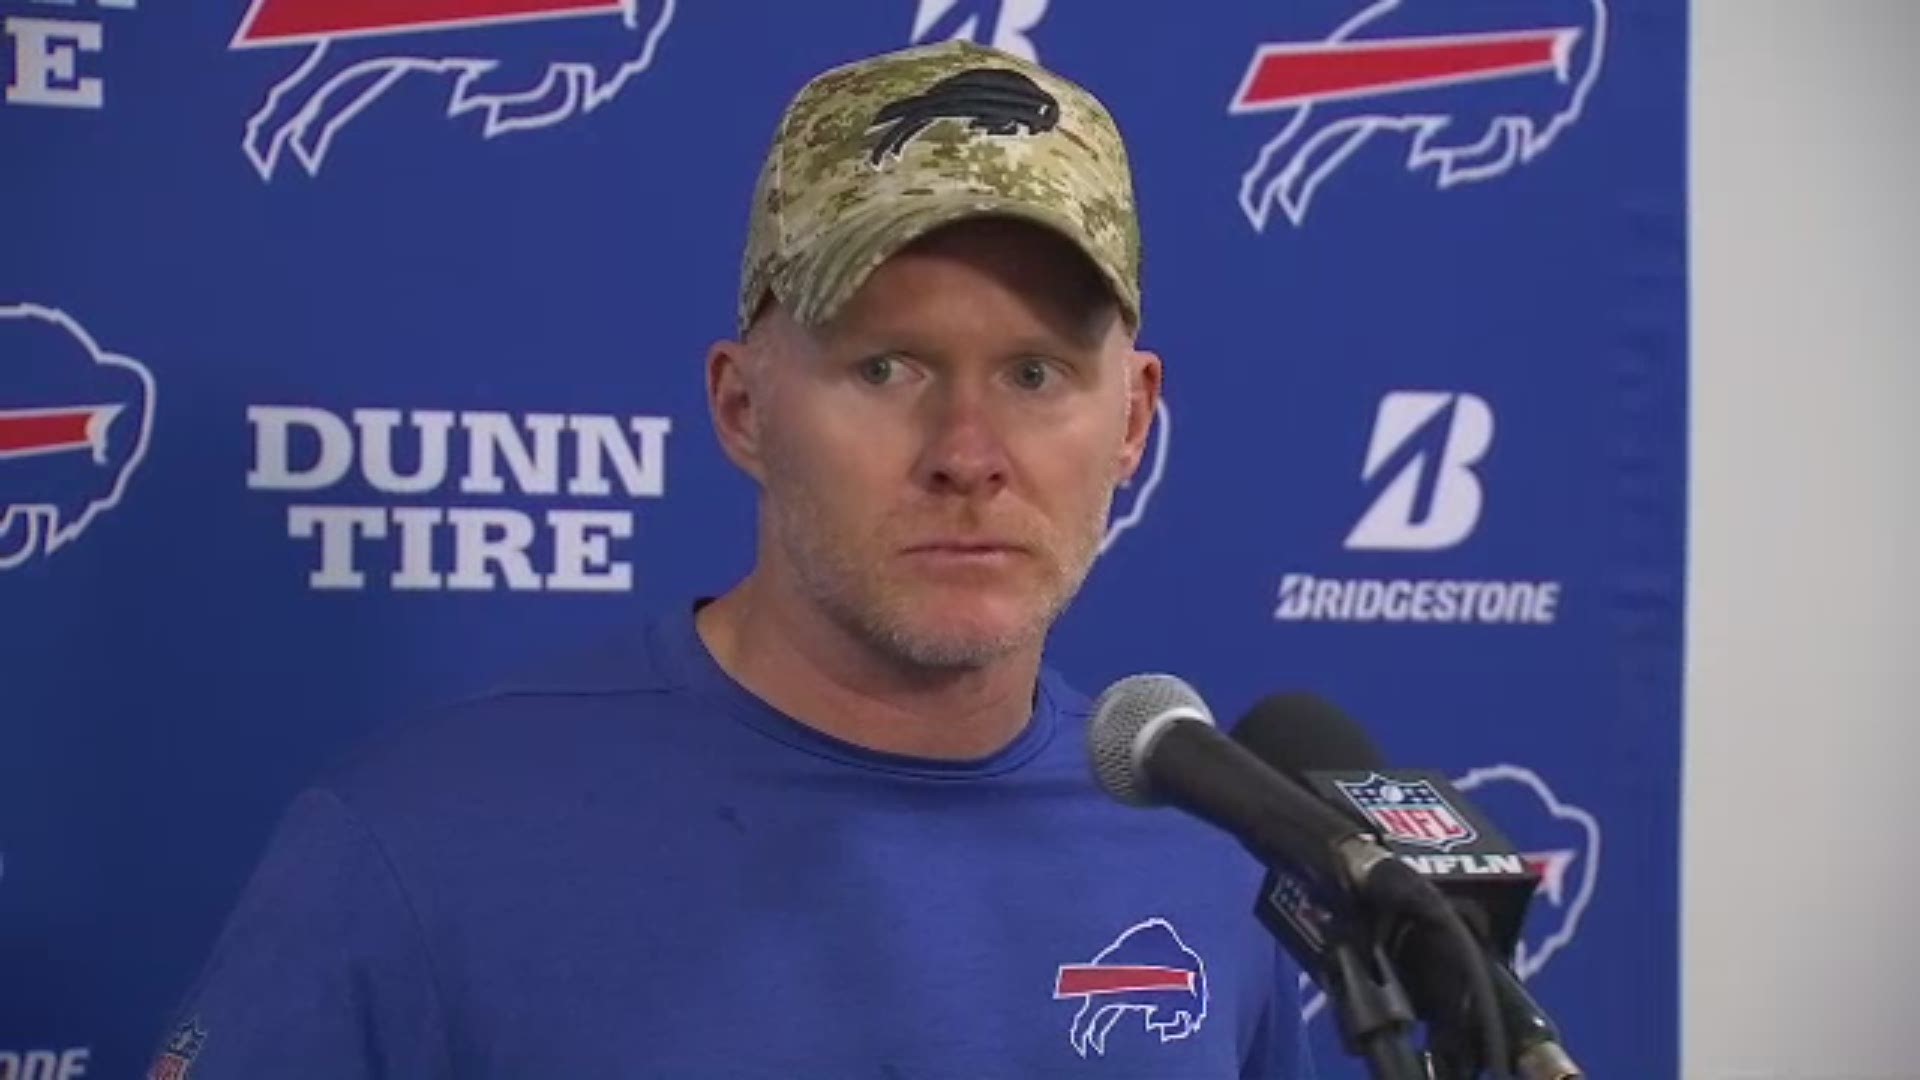 The Bills discuss their 37-20 win over the Dolphins in Miami.